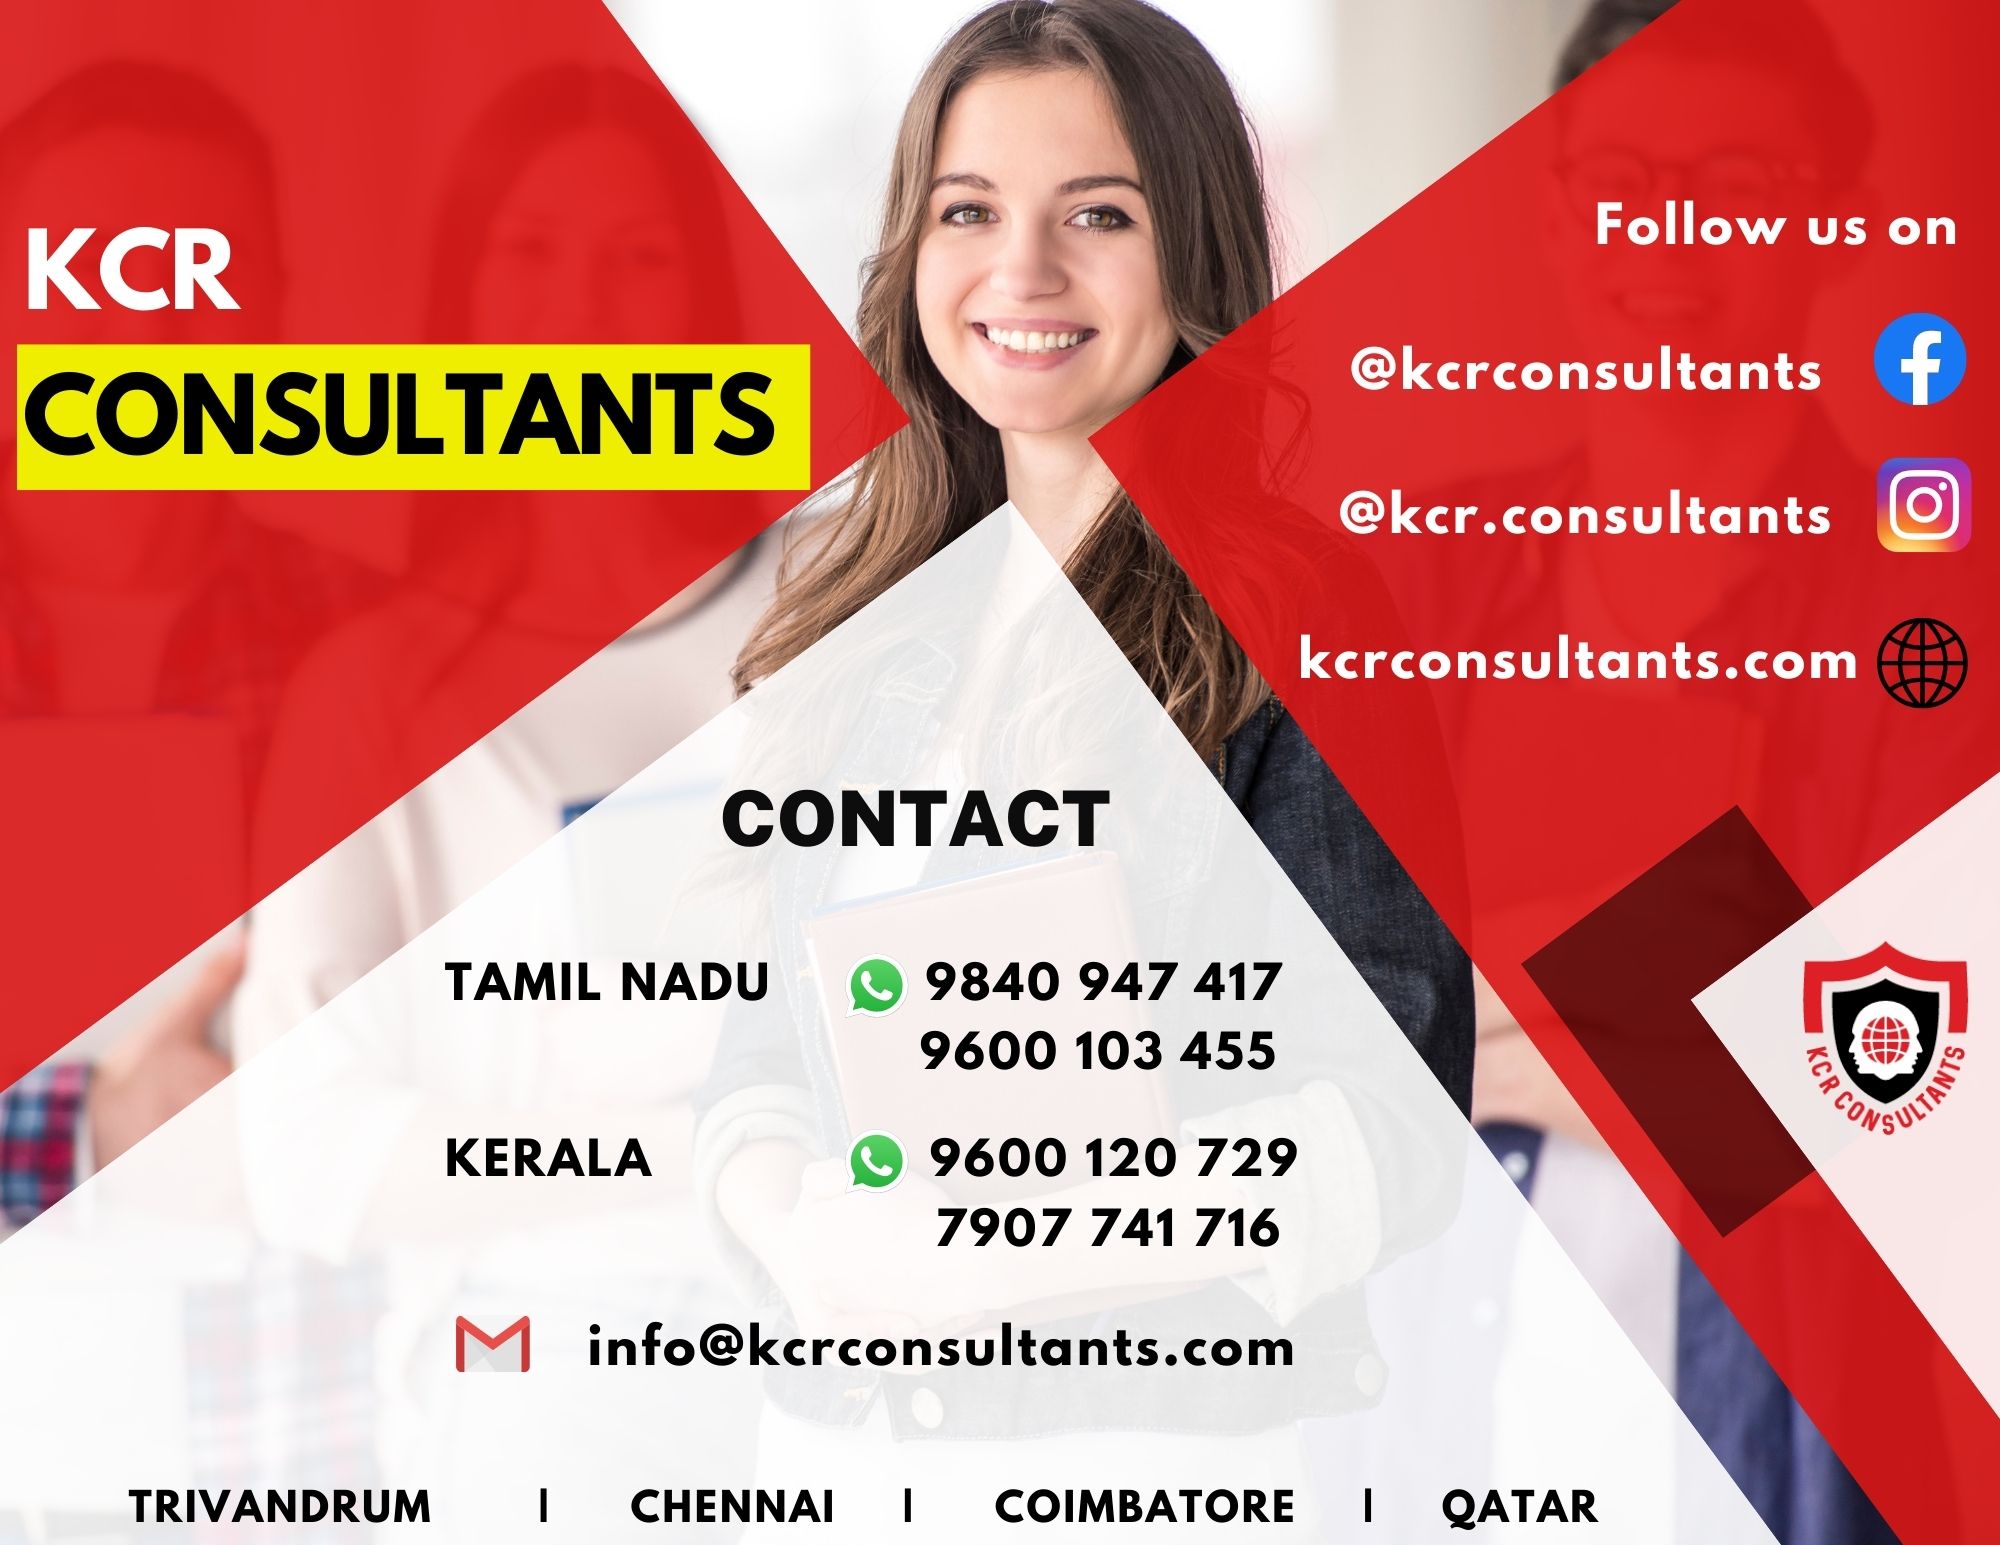 KCR CONSULTANTS - CONTACT